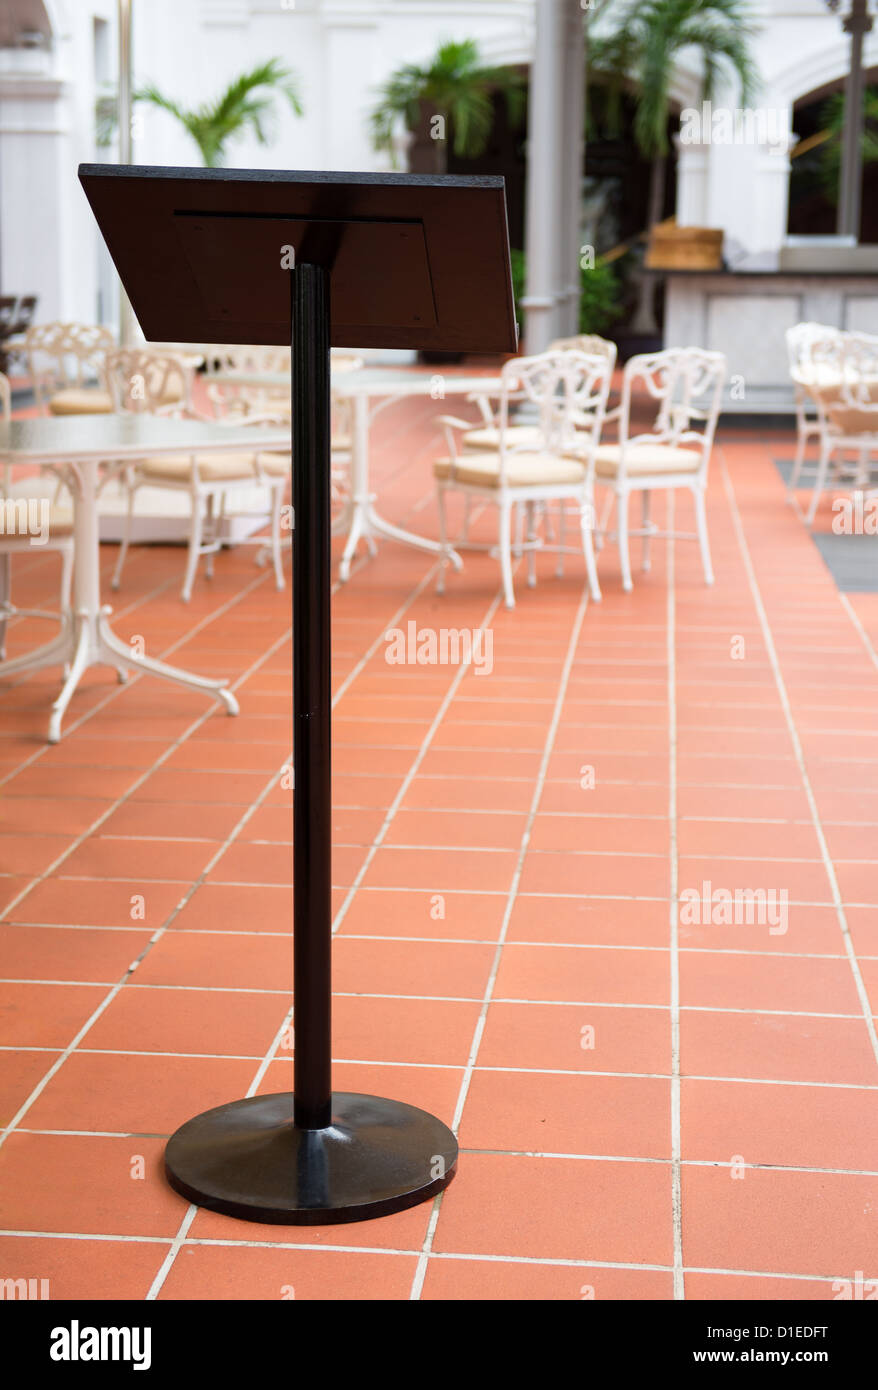 Standing menu board with outdoor cafe and bar on background Stock Photo